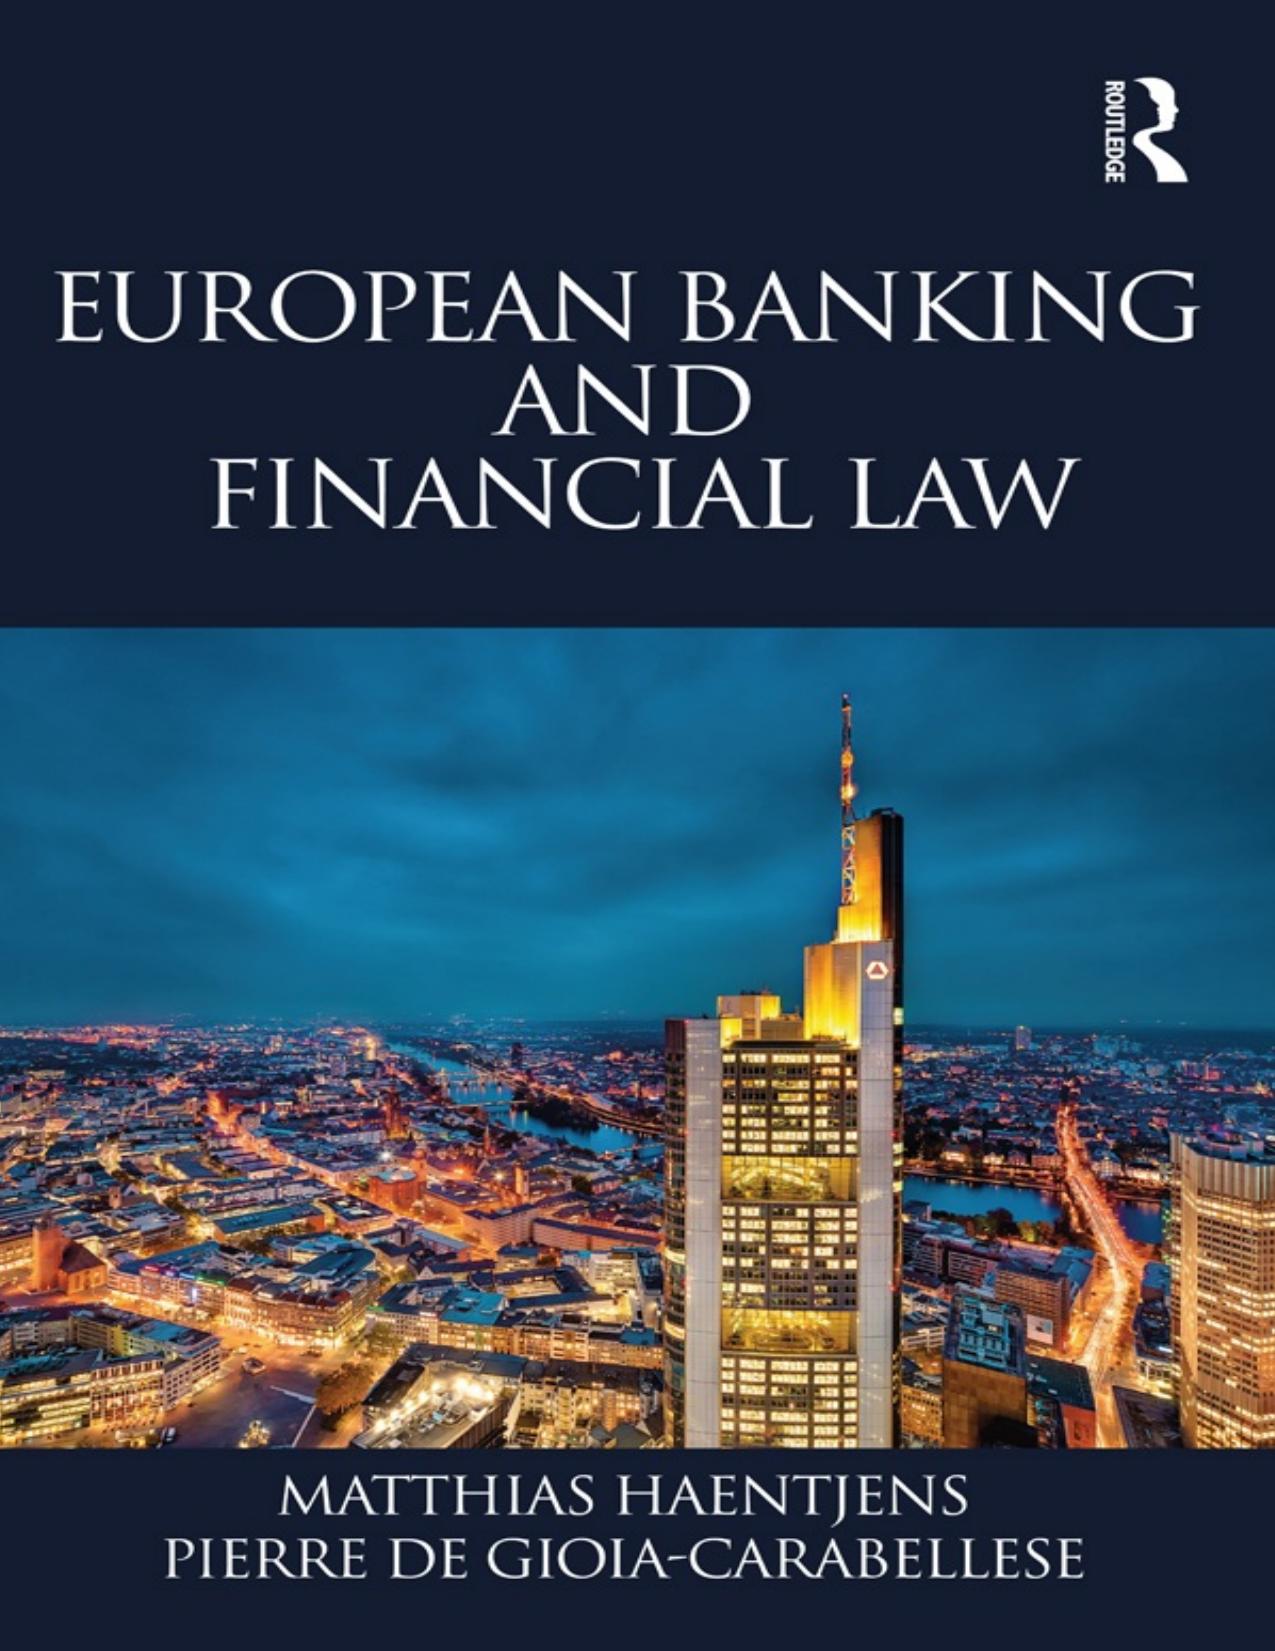 European Banking and Financial Law - PDFDrive.com